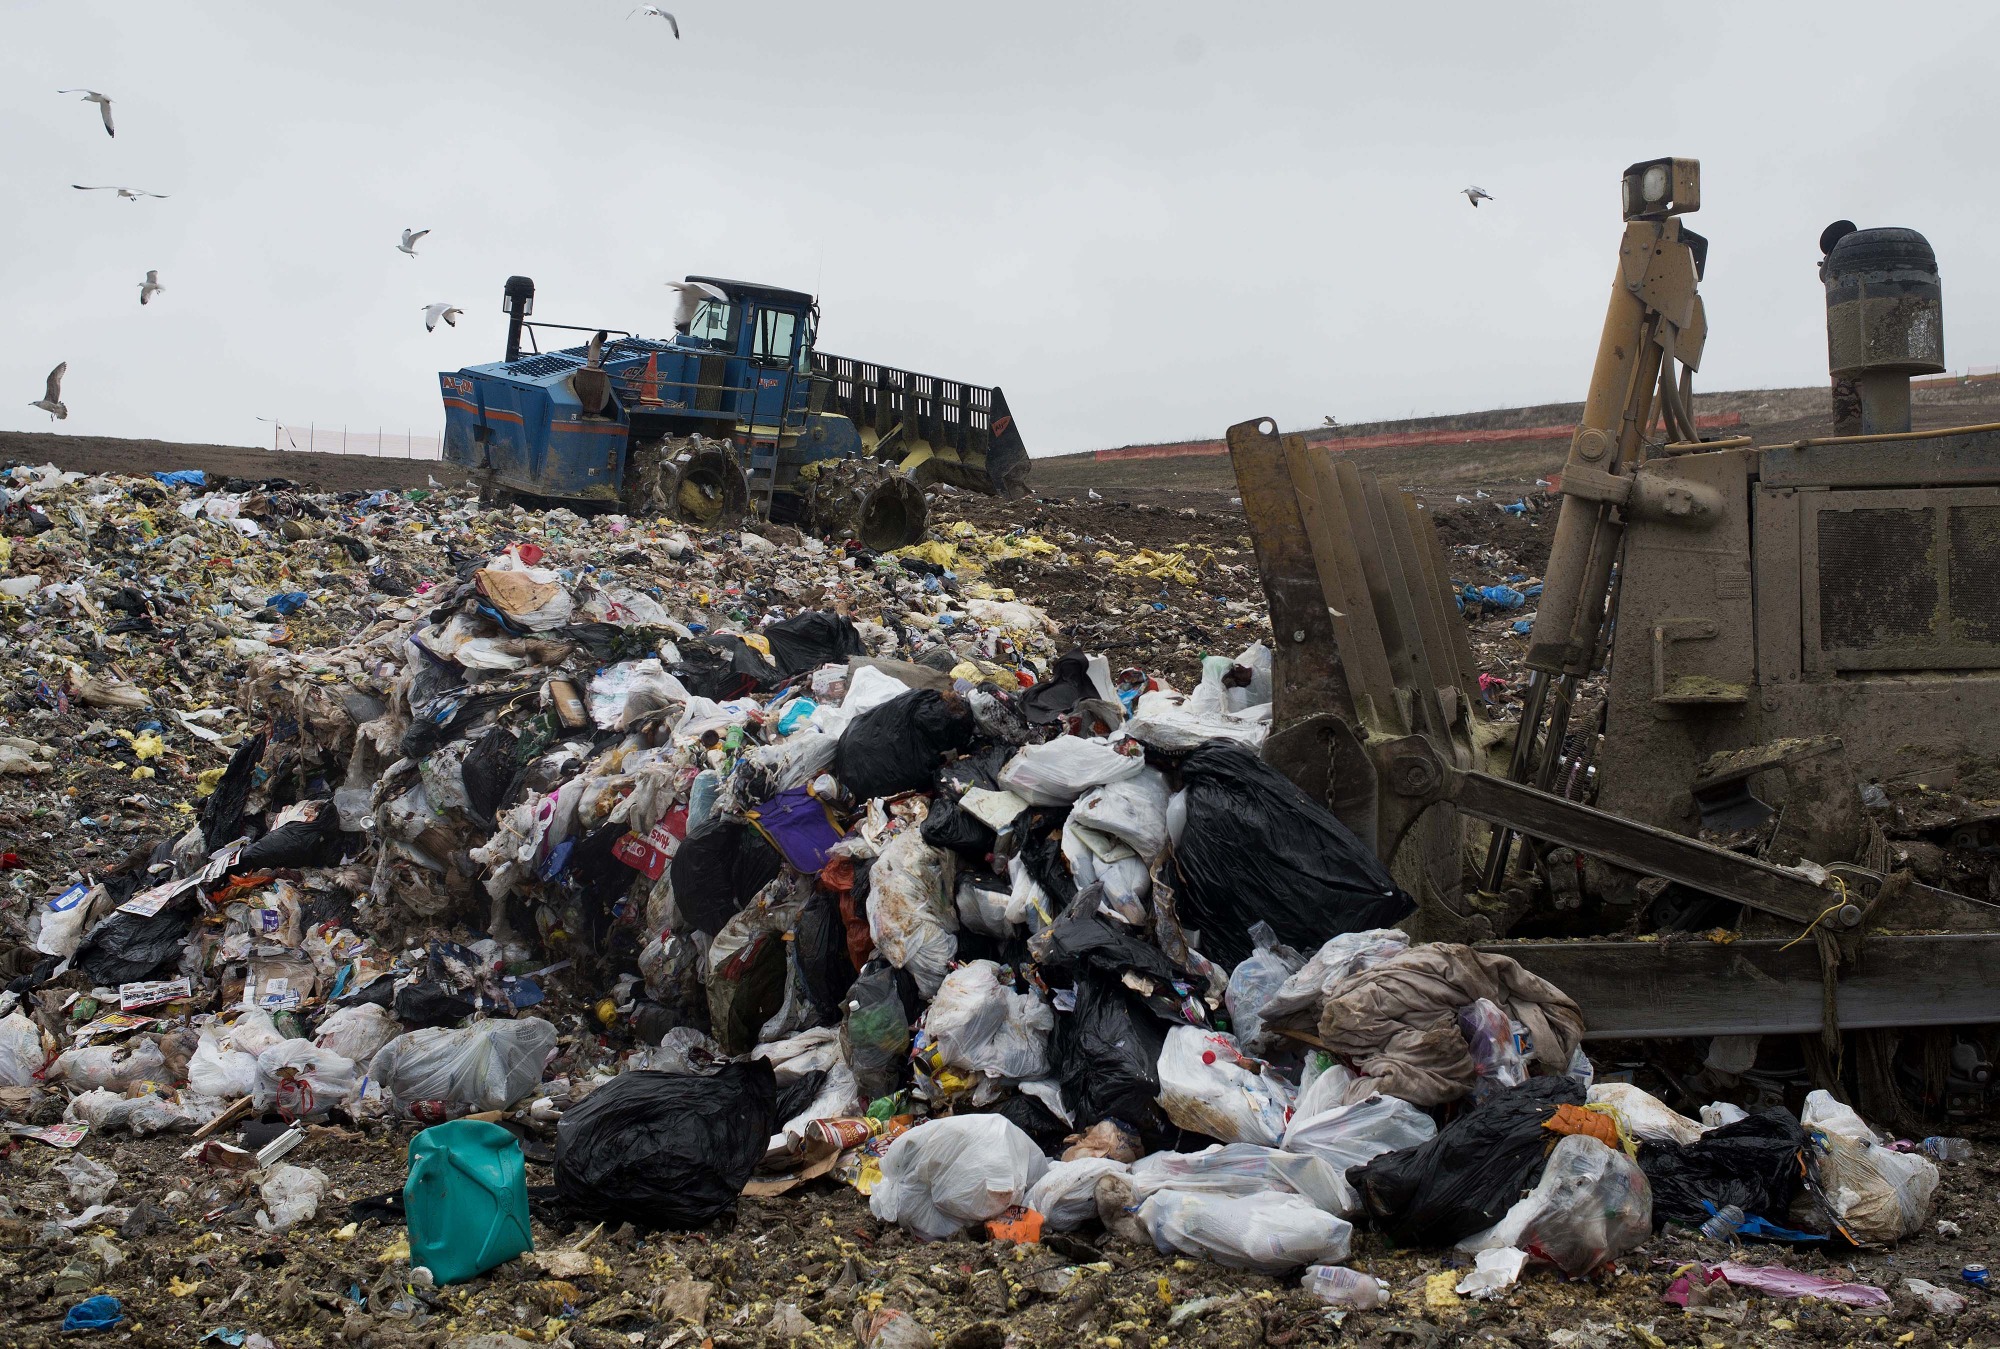 Operations At The Defiance County Landfill